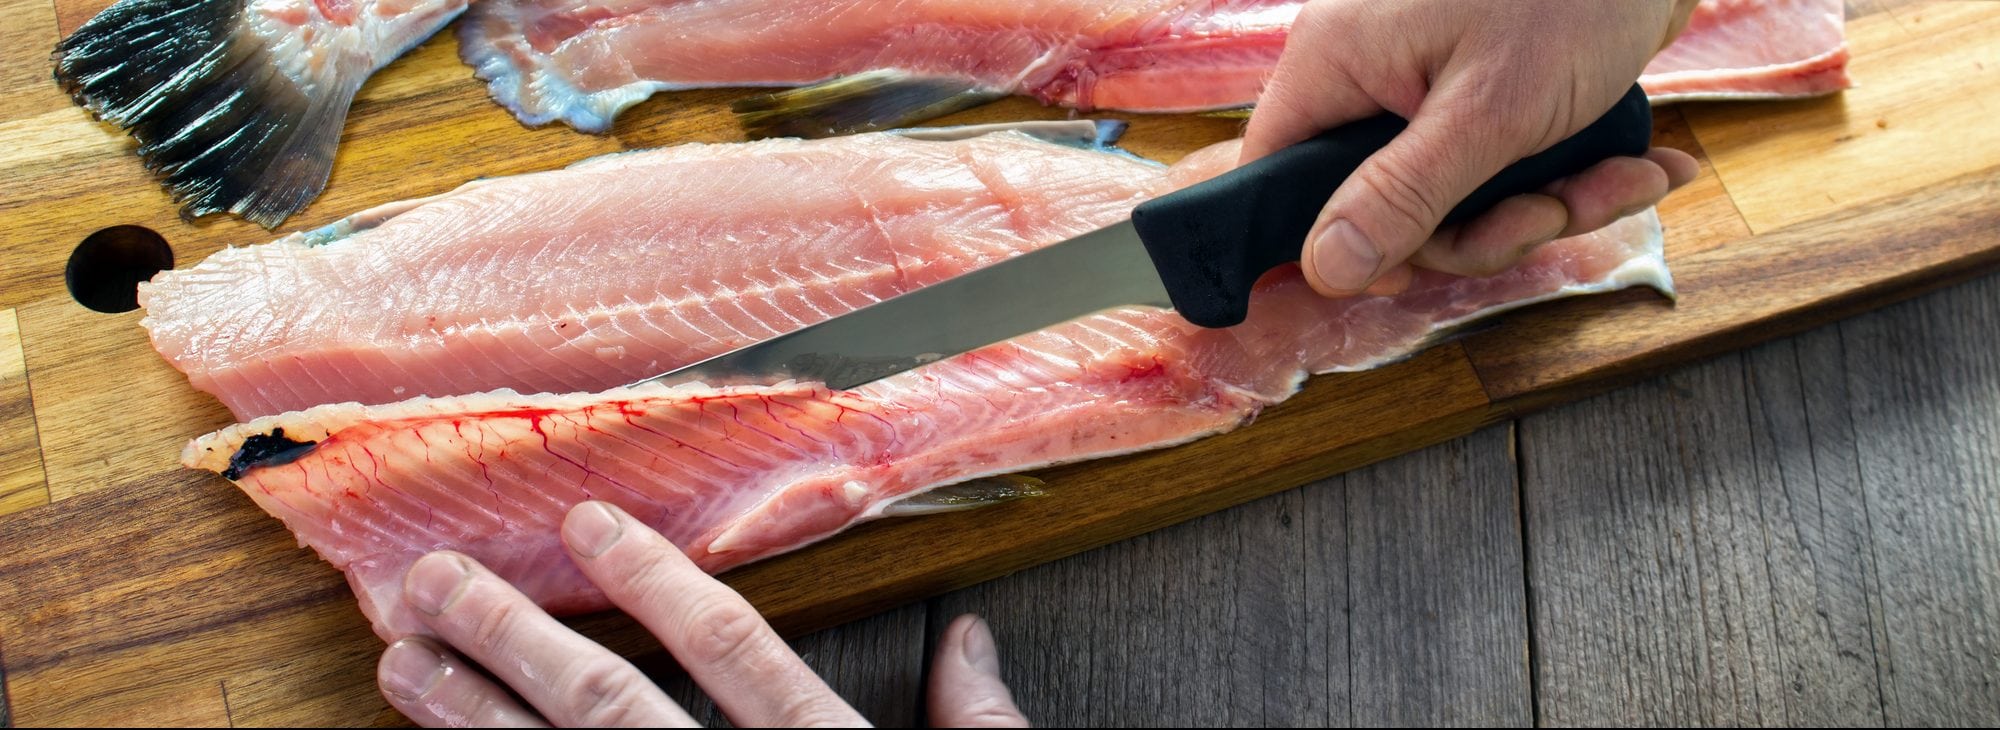 Filleting trout , removing rib bones with sharp fillet knife on wood